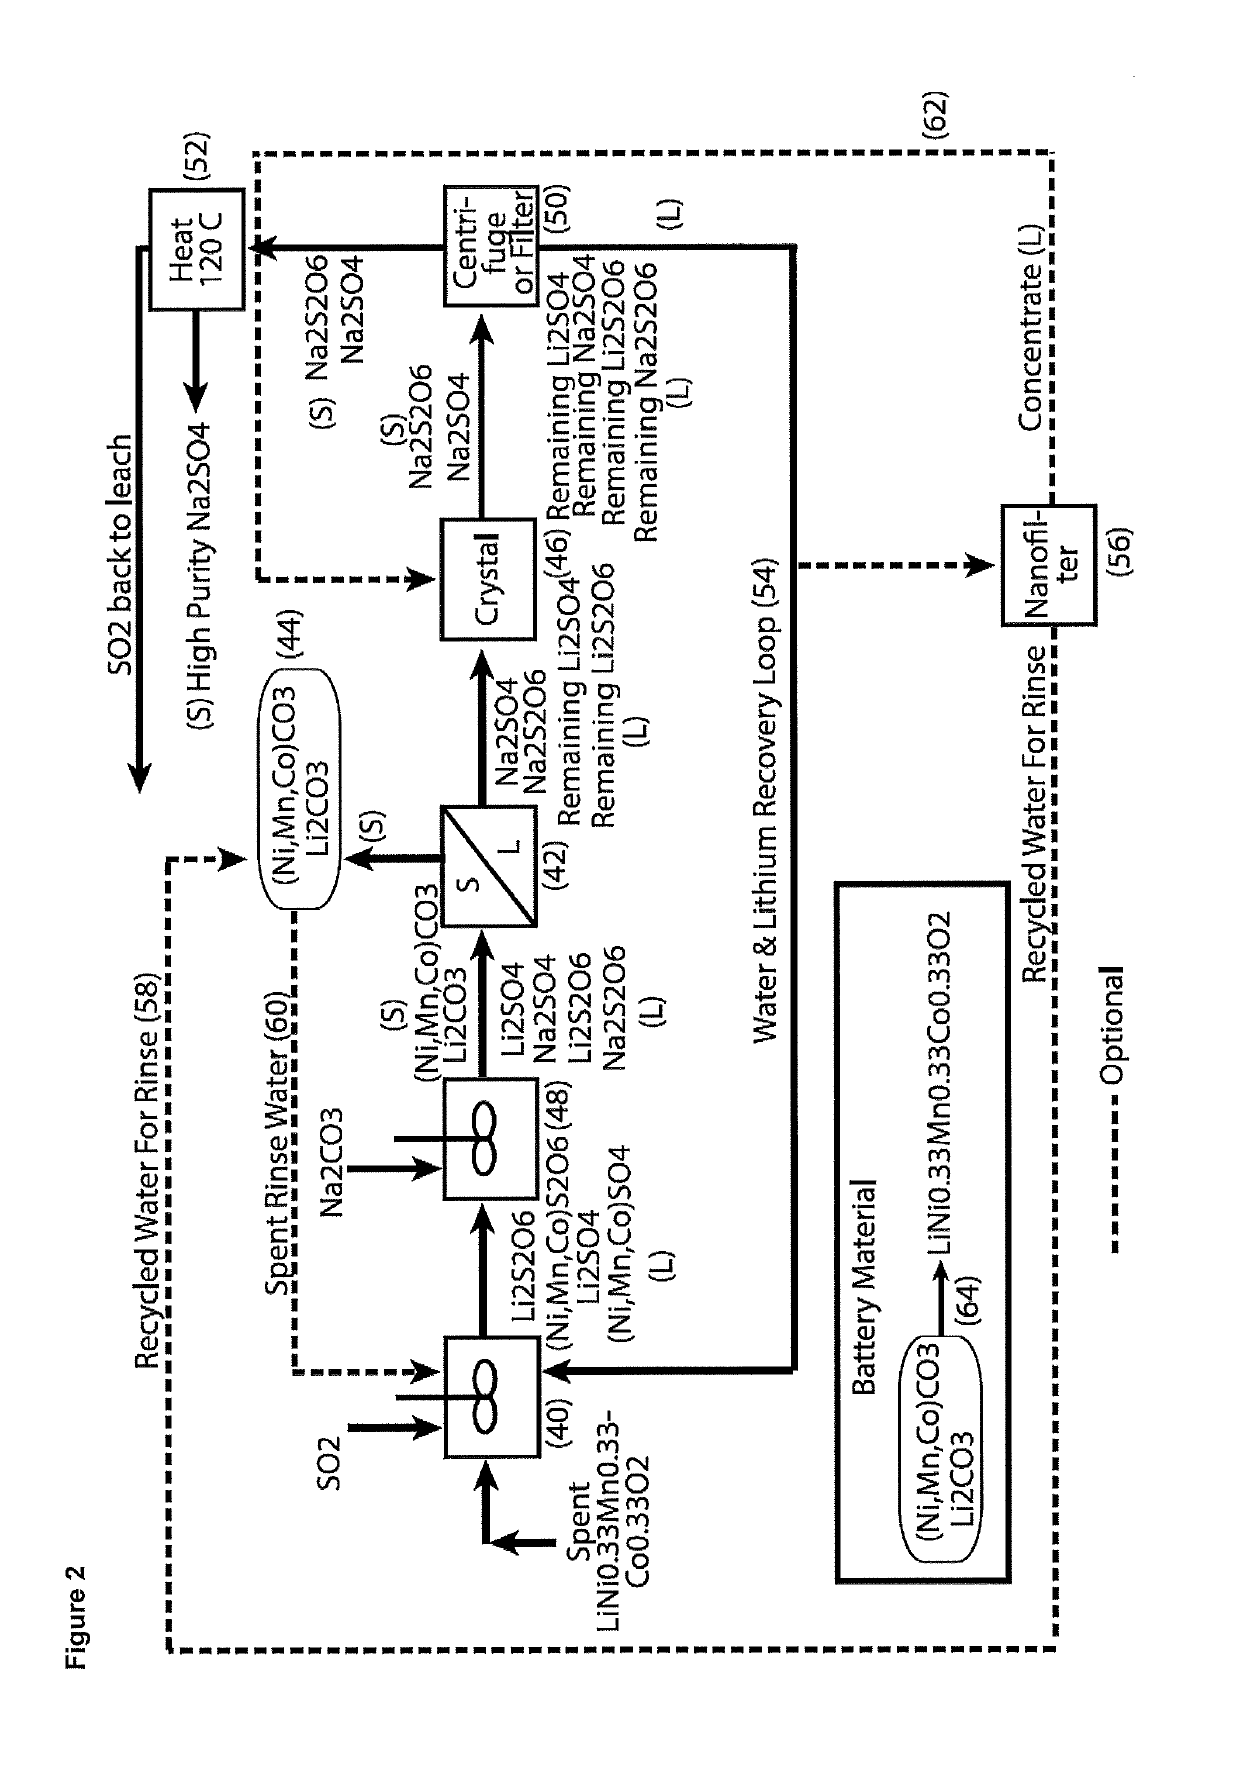 Processing of cobaltous sulphate/dithionate liquors derived from cobalt resource